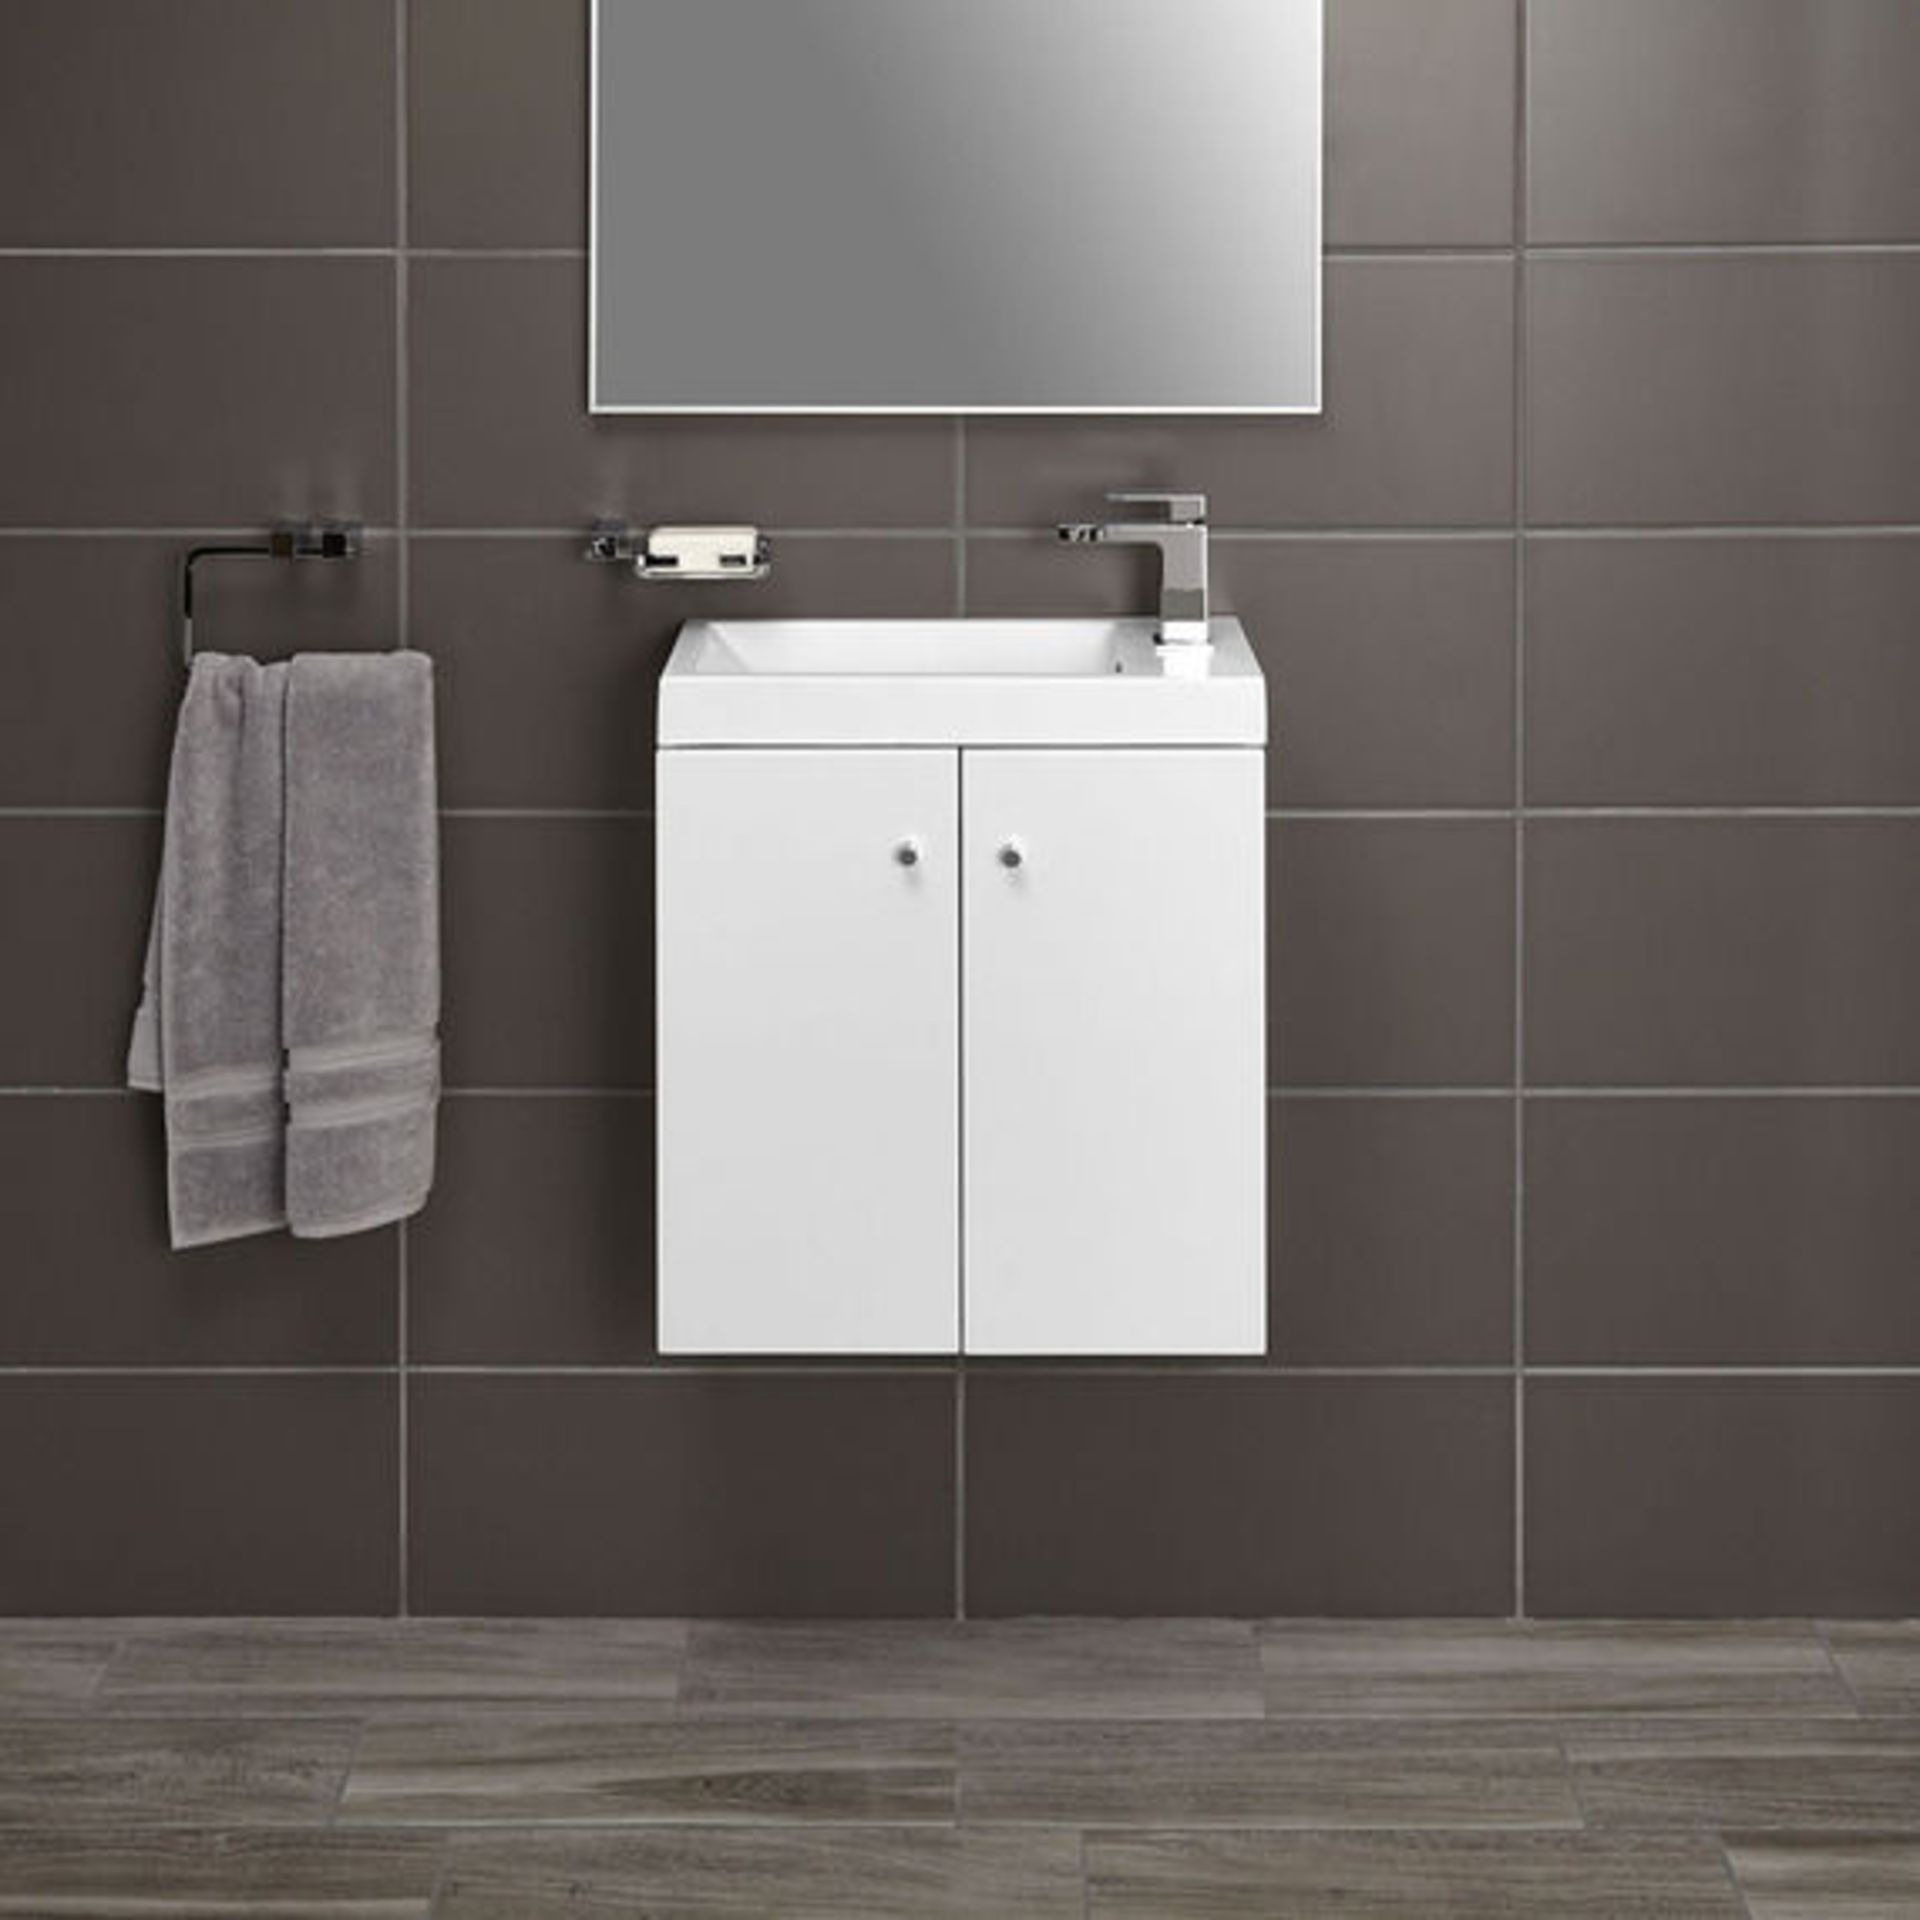 10 x Alpine Duo 495 Wall Hung Vanity Unit  - Gloss White - Brand New Boxed Stock - Dimensions: W49.5 - Image 3 of 5